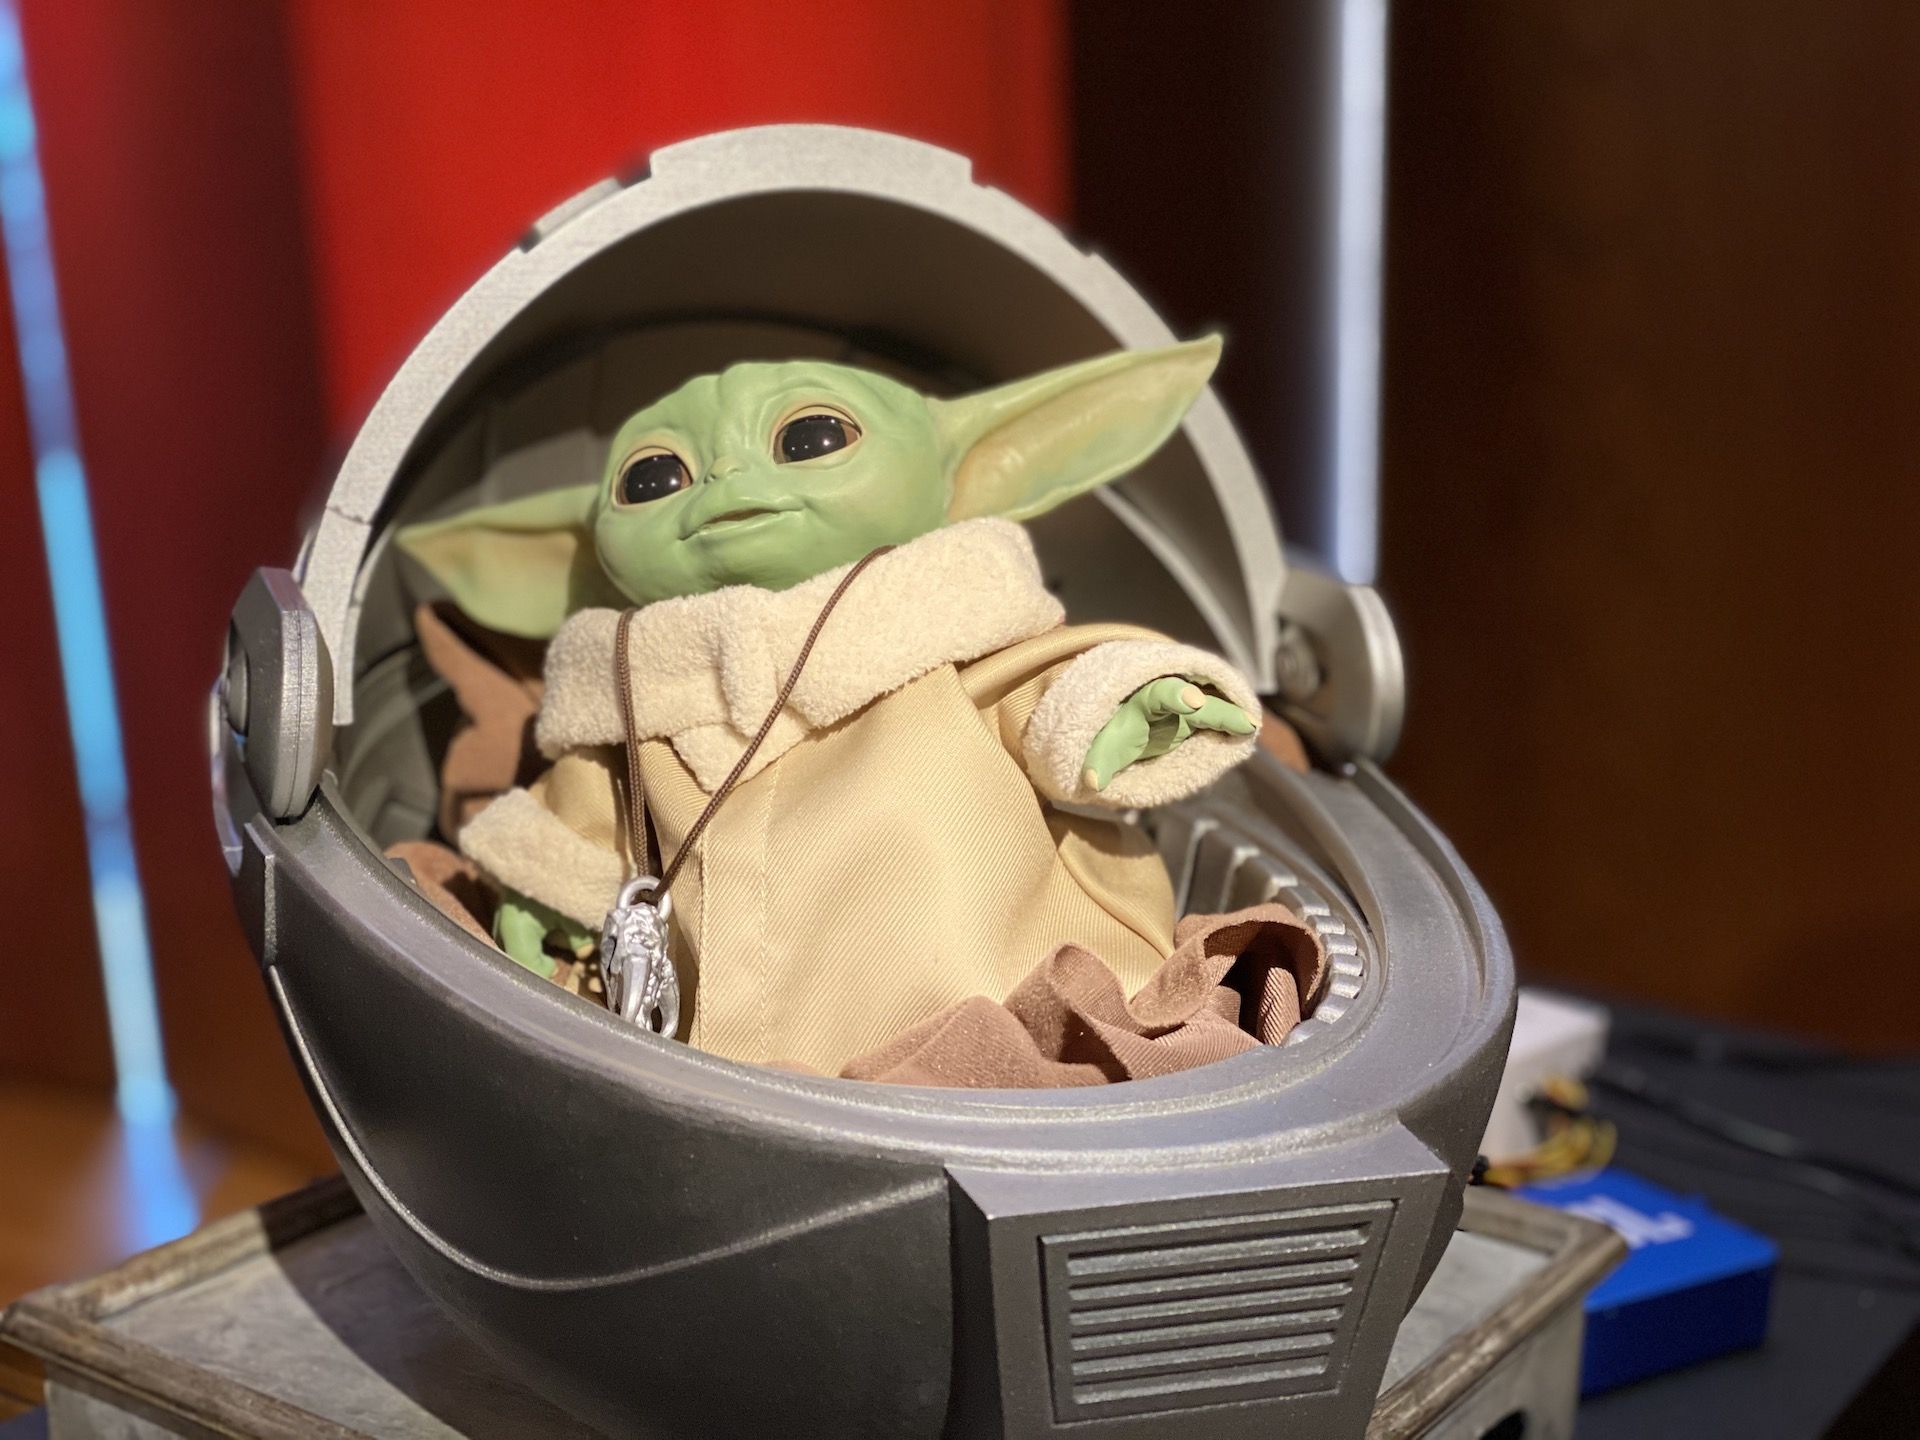 Baby Yoda merch is finally here and it's almost too adorable